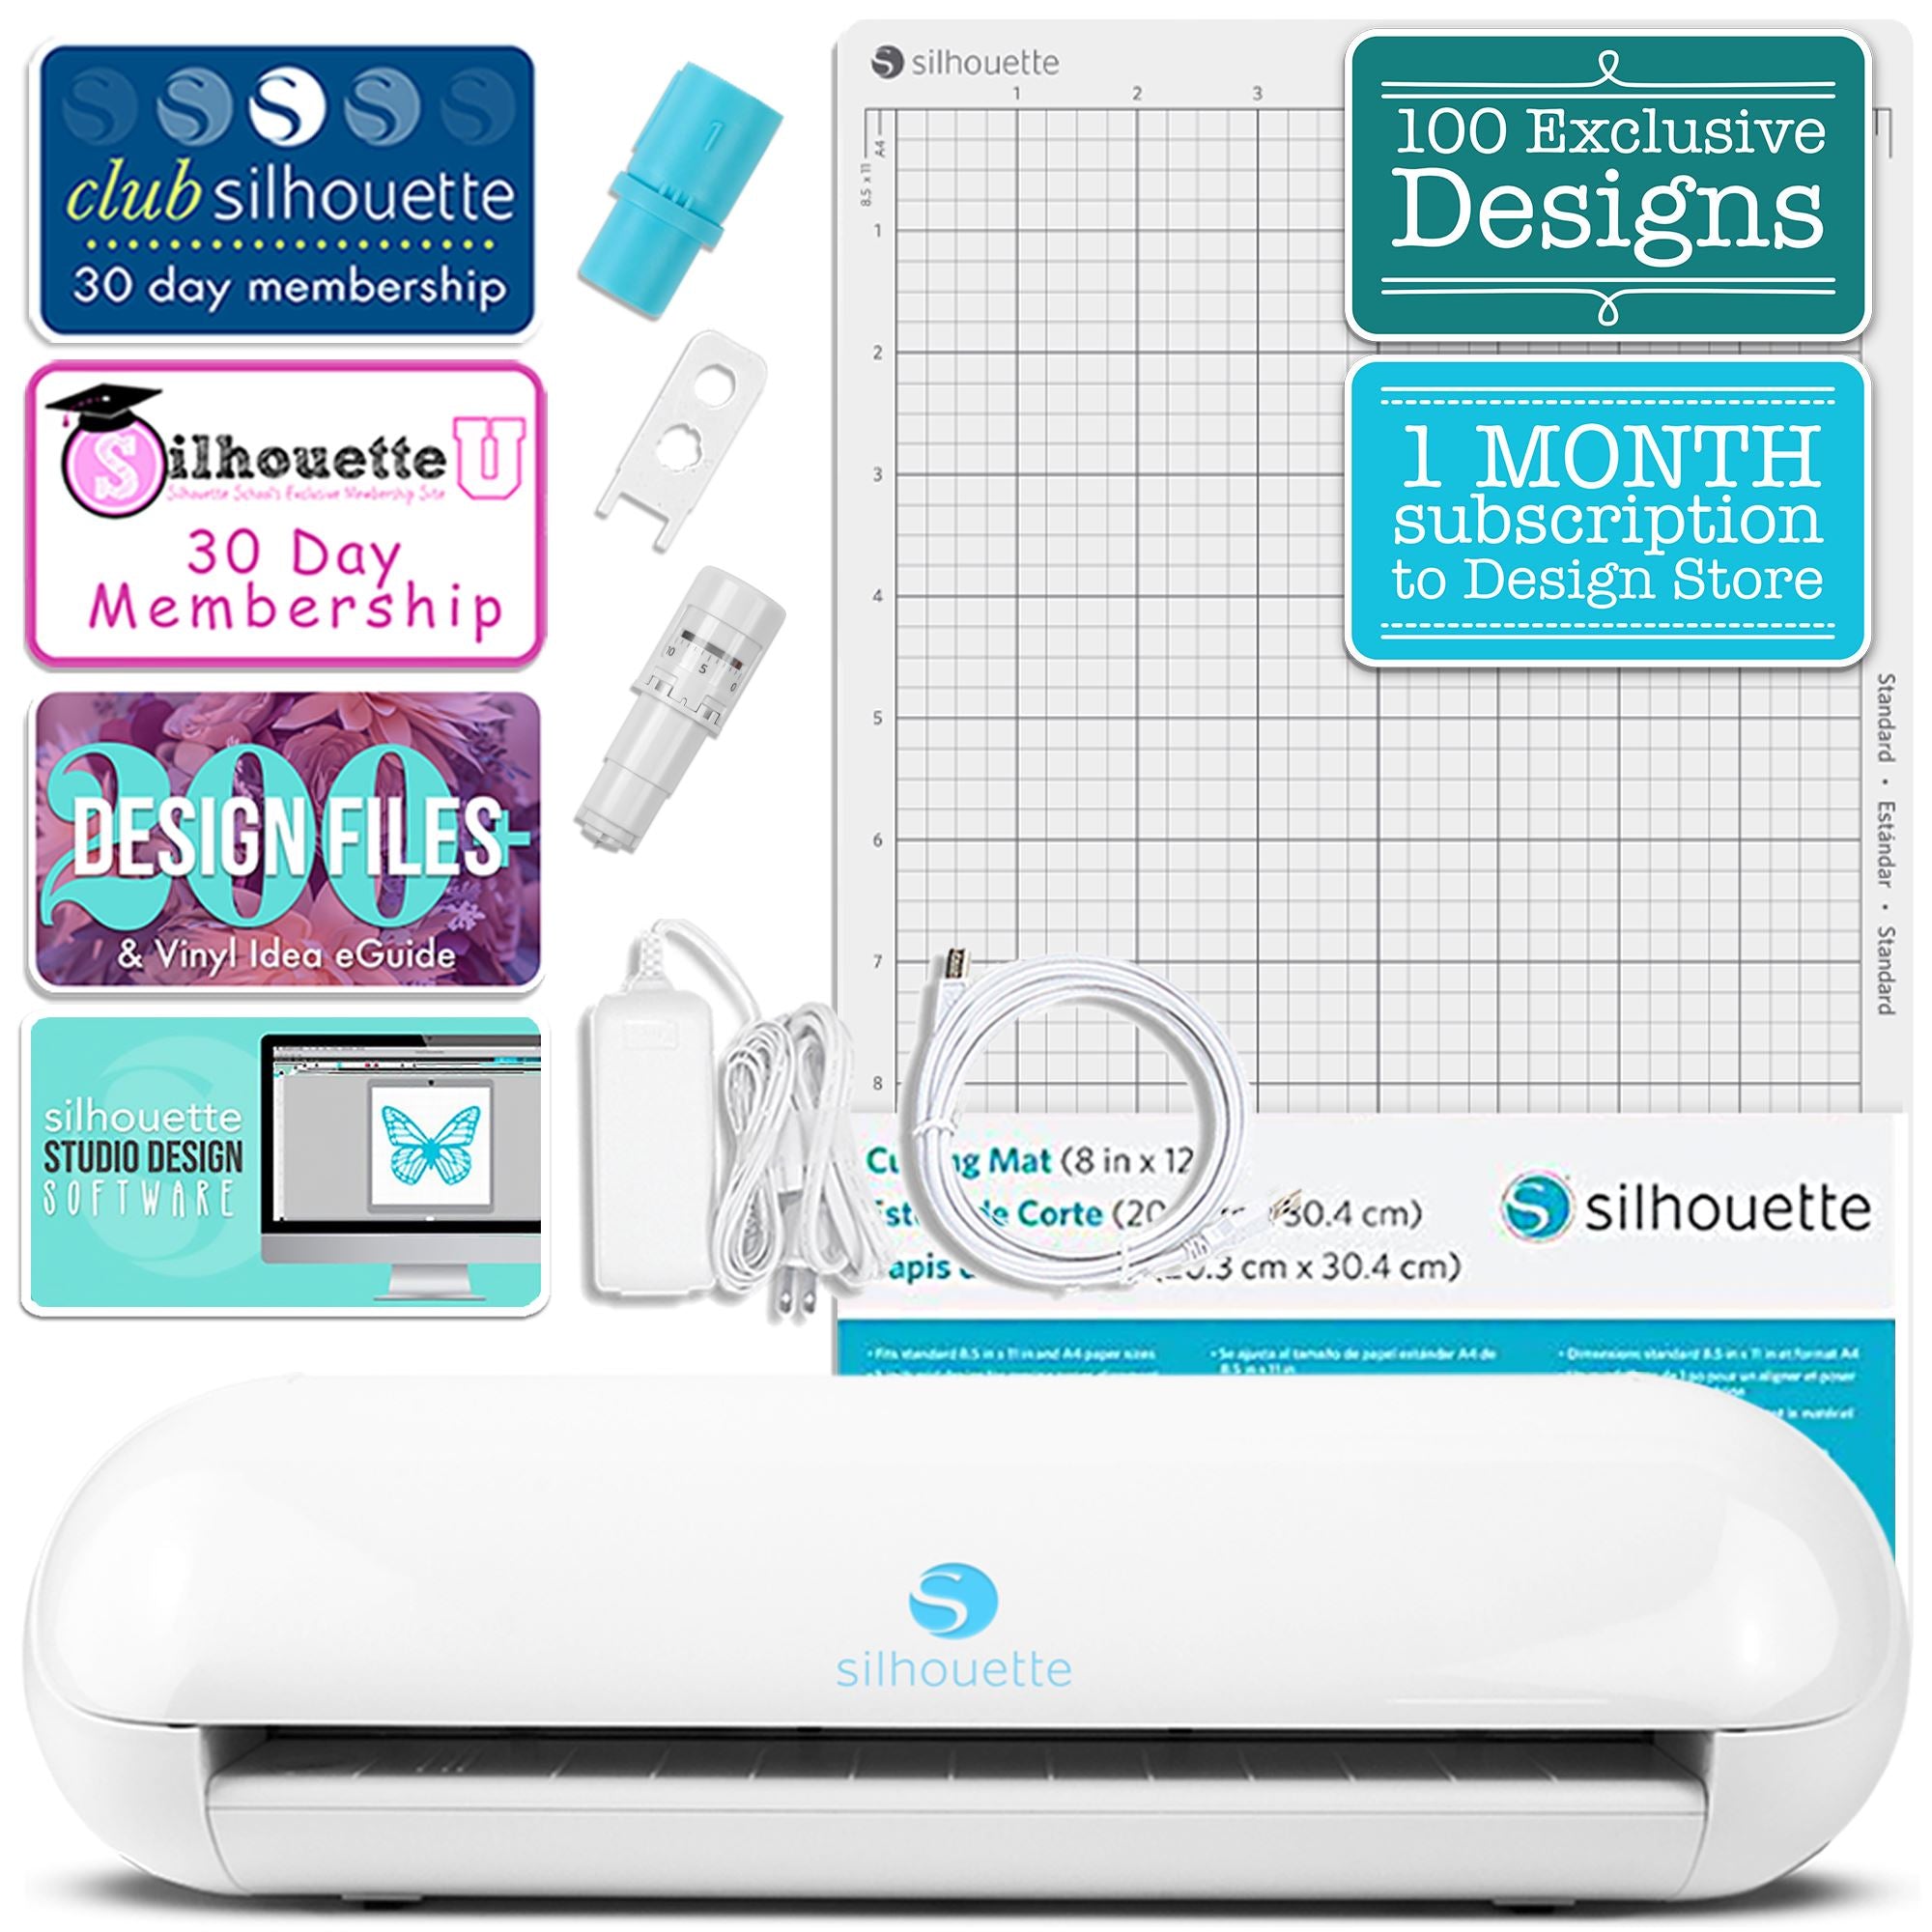 Silhouette White Cameo 4 Deluxe Siser Easyweed Heat Transfer (HTV) Bundle